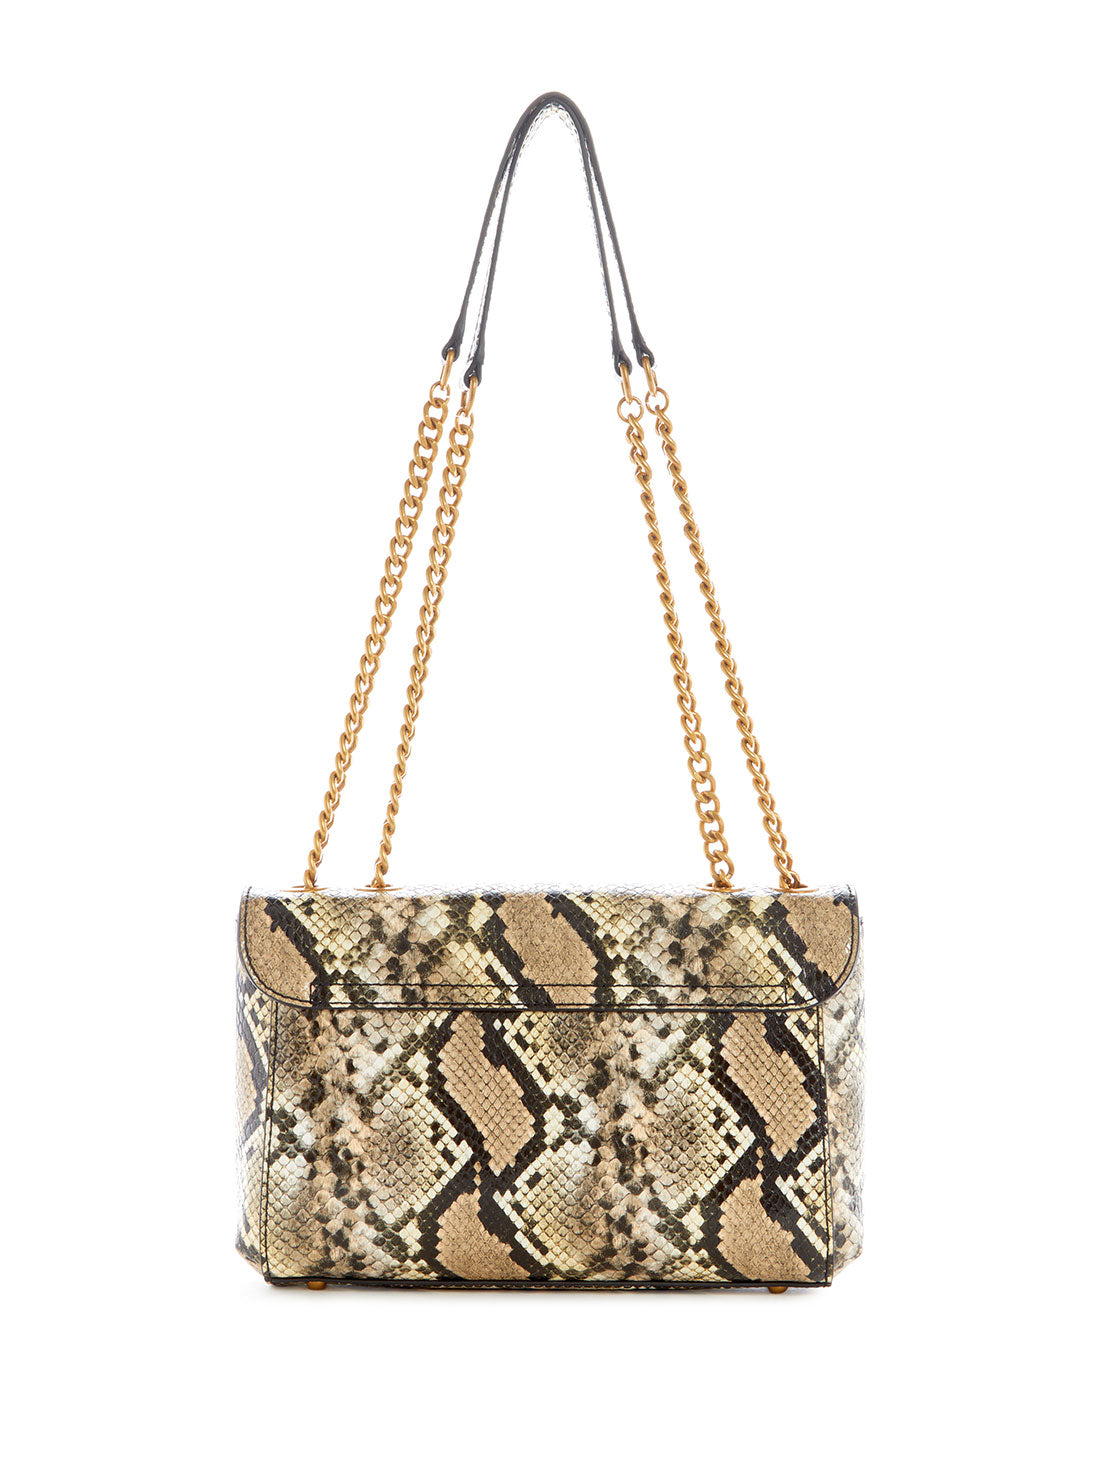 GUESS Women's Natural Python Nell Crossbody Bag KB867821 Back View